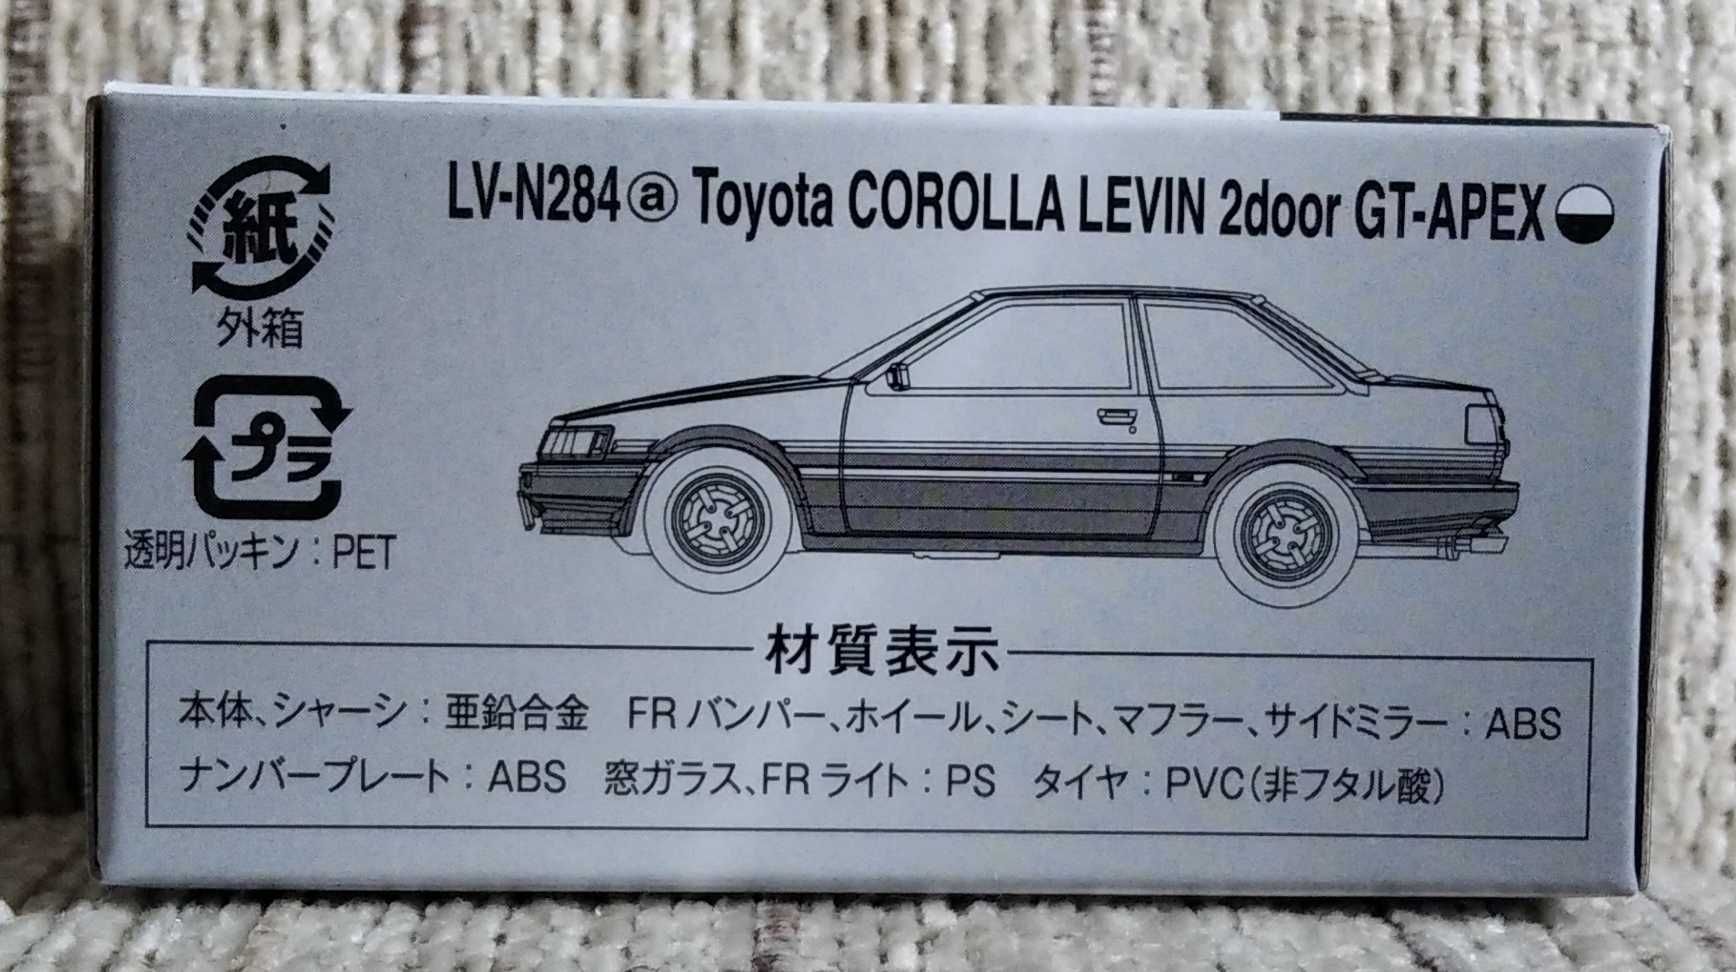 Tomica Limited Vintage Neo LV-N284a Toyota Corolla Levin GT-APEX (84)